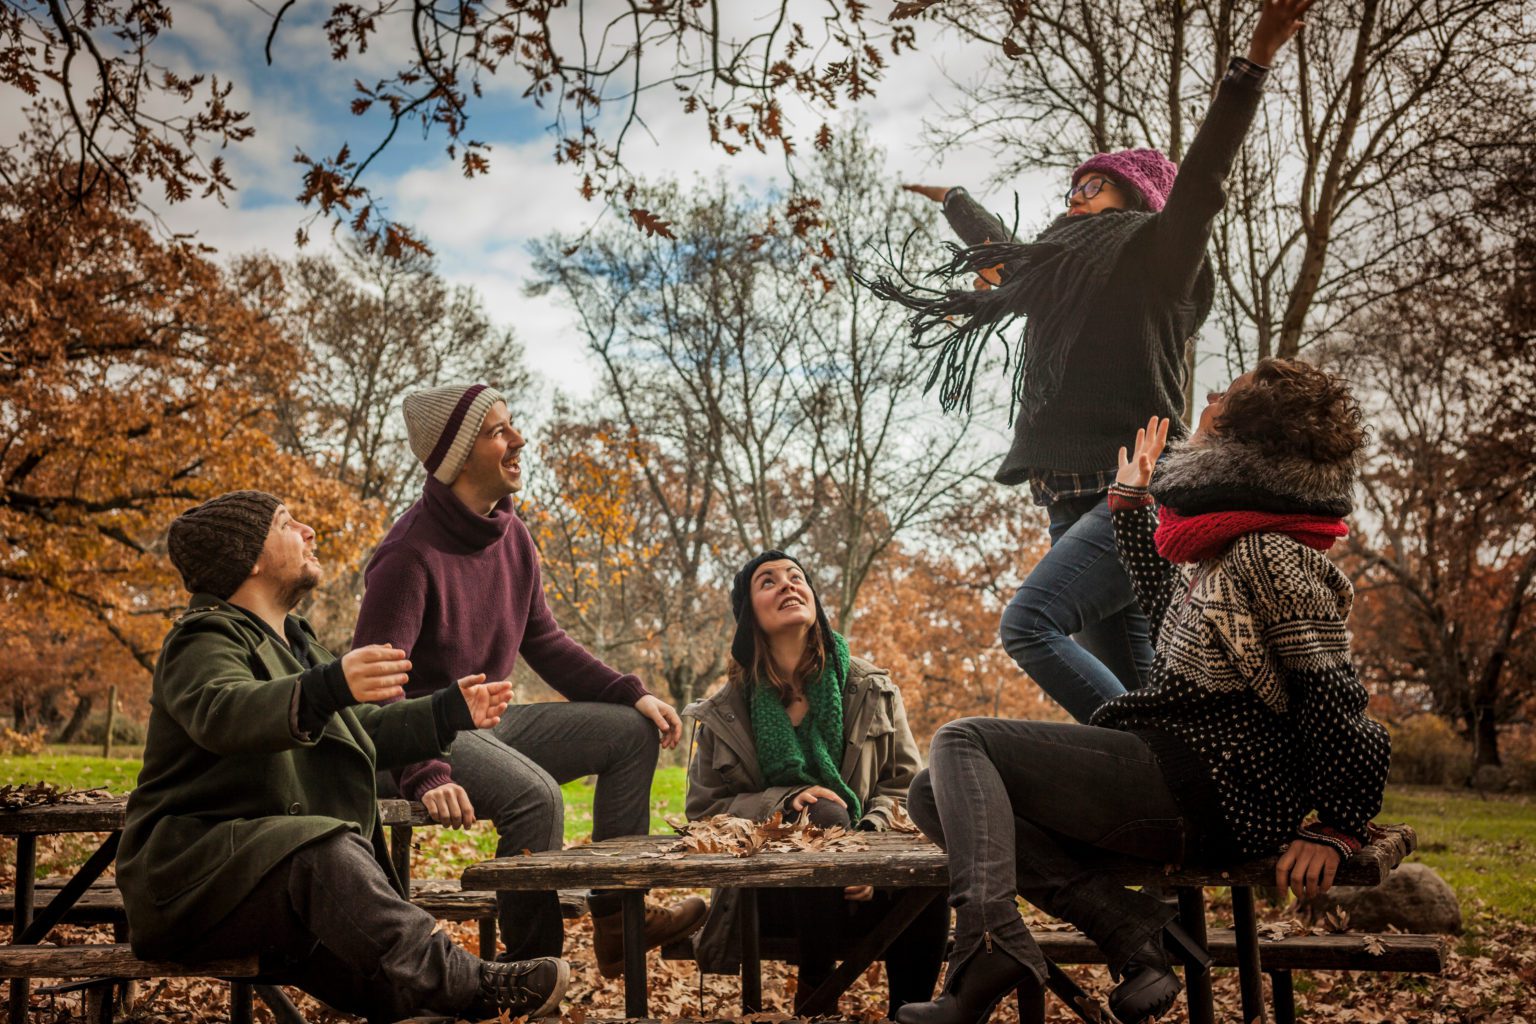 Group of twenty-somethings laughs it up in the park on a Fall day.